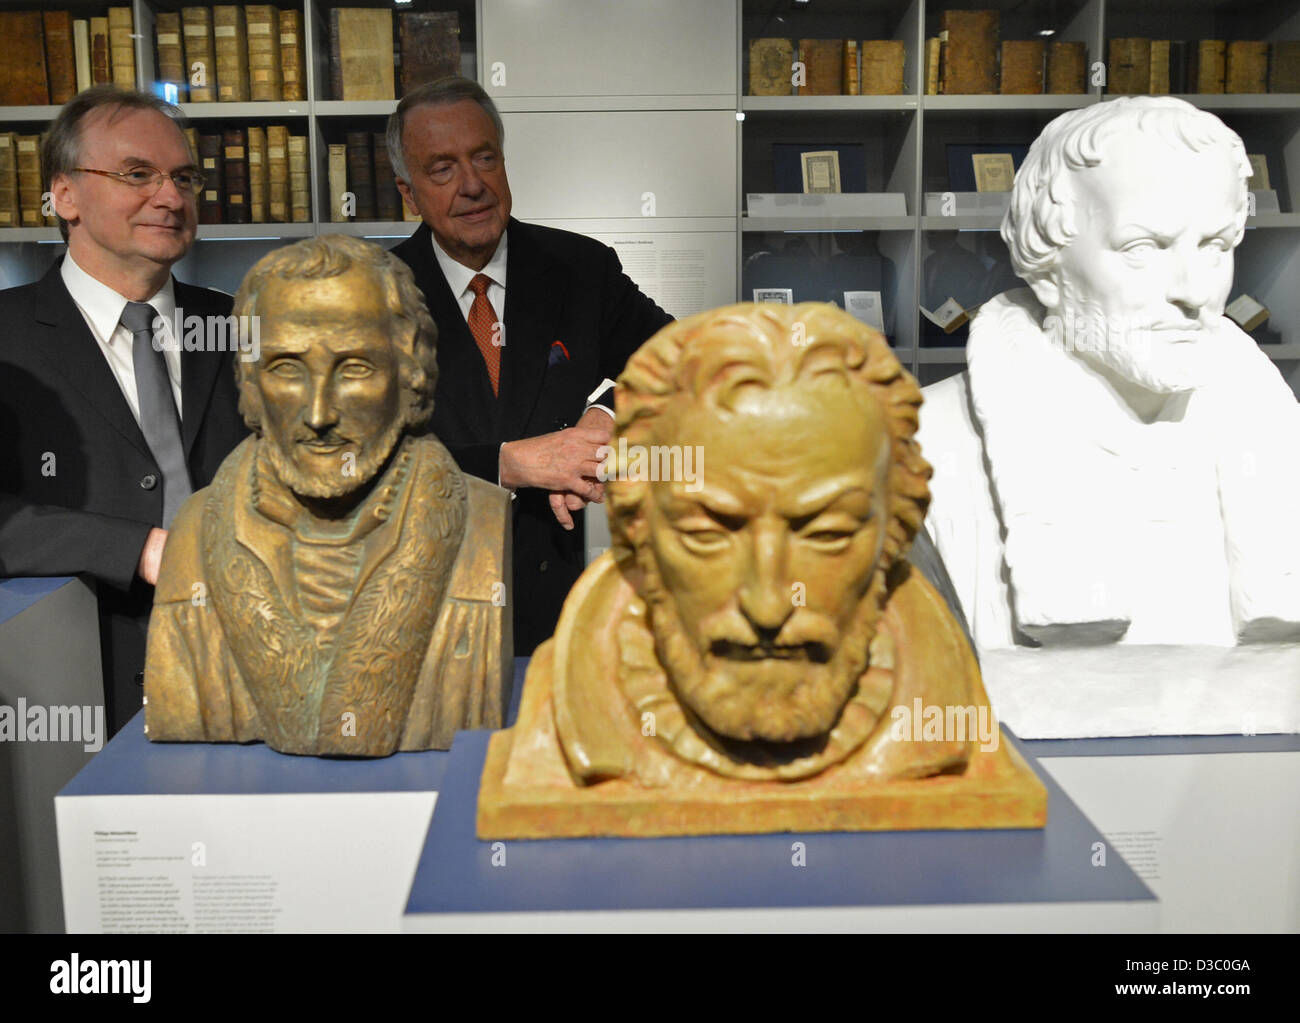 Wittenberg, Germany, 15the Feb,  2013. Saxony-Anhalt Premier Reiner Haseloff (L) and Minister of State for Culture Bernd Neumann look at different busts of reformer Philipp Melanchthon at the Melanchthon House in Wittenberg, Germany, 15 February 2013. With the exhibition 'Philipp Melanchthon: Life - Work - Reception' the museum reopens after its renovation. Photo: HENDRIK SCHMIDT/Alamy Live News Stock Photo